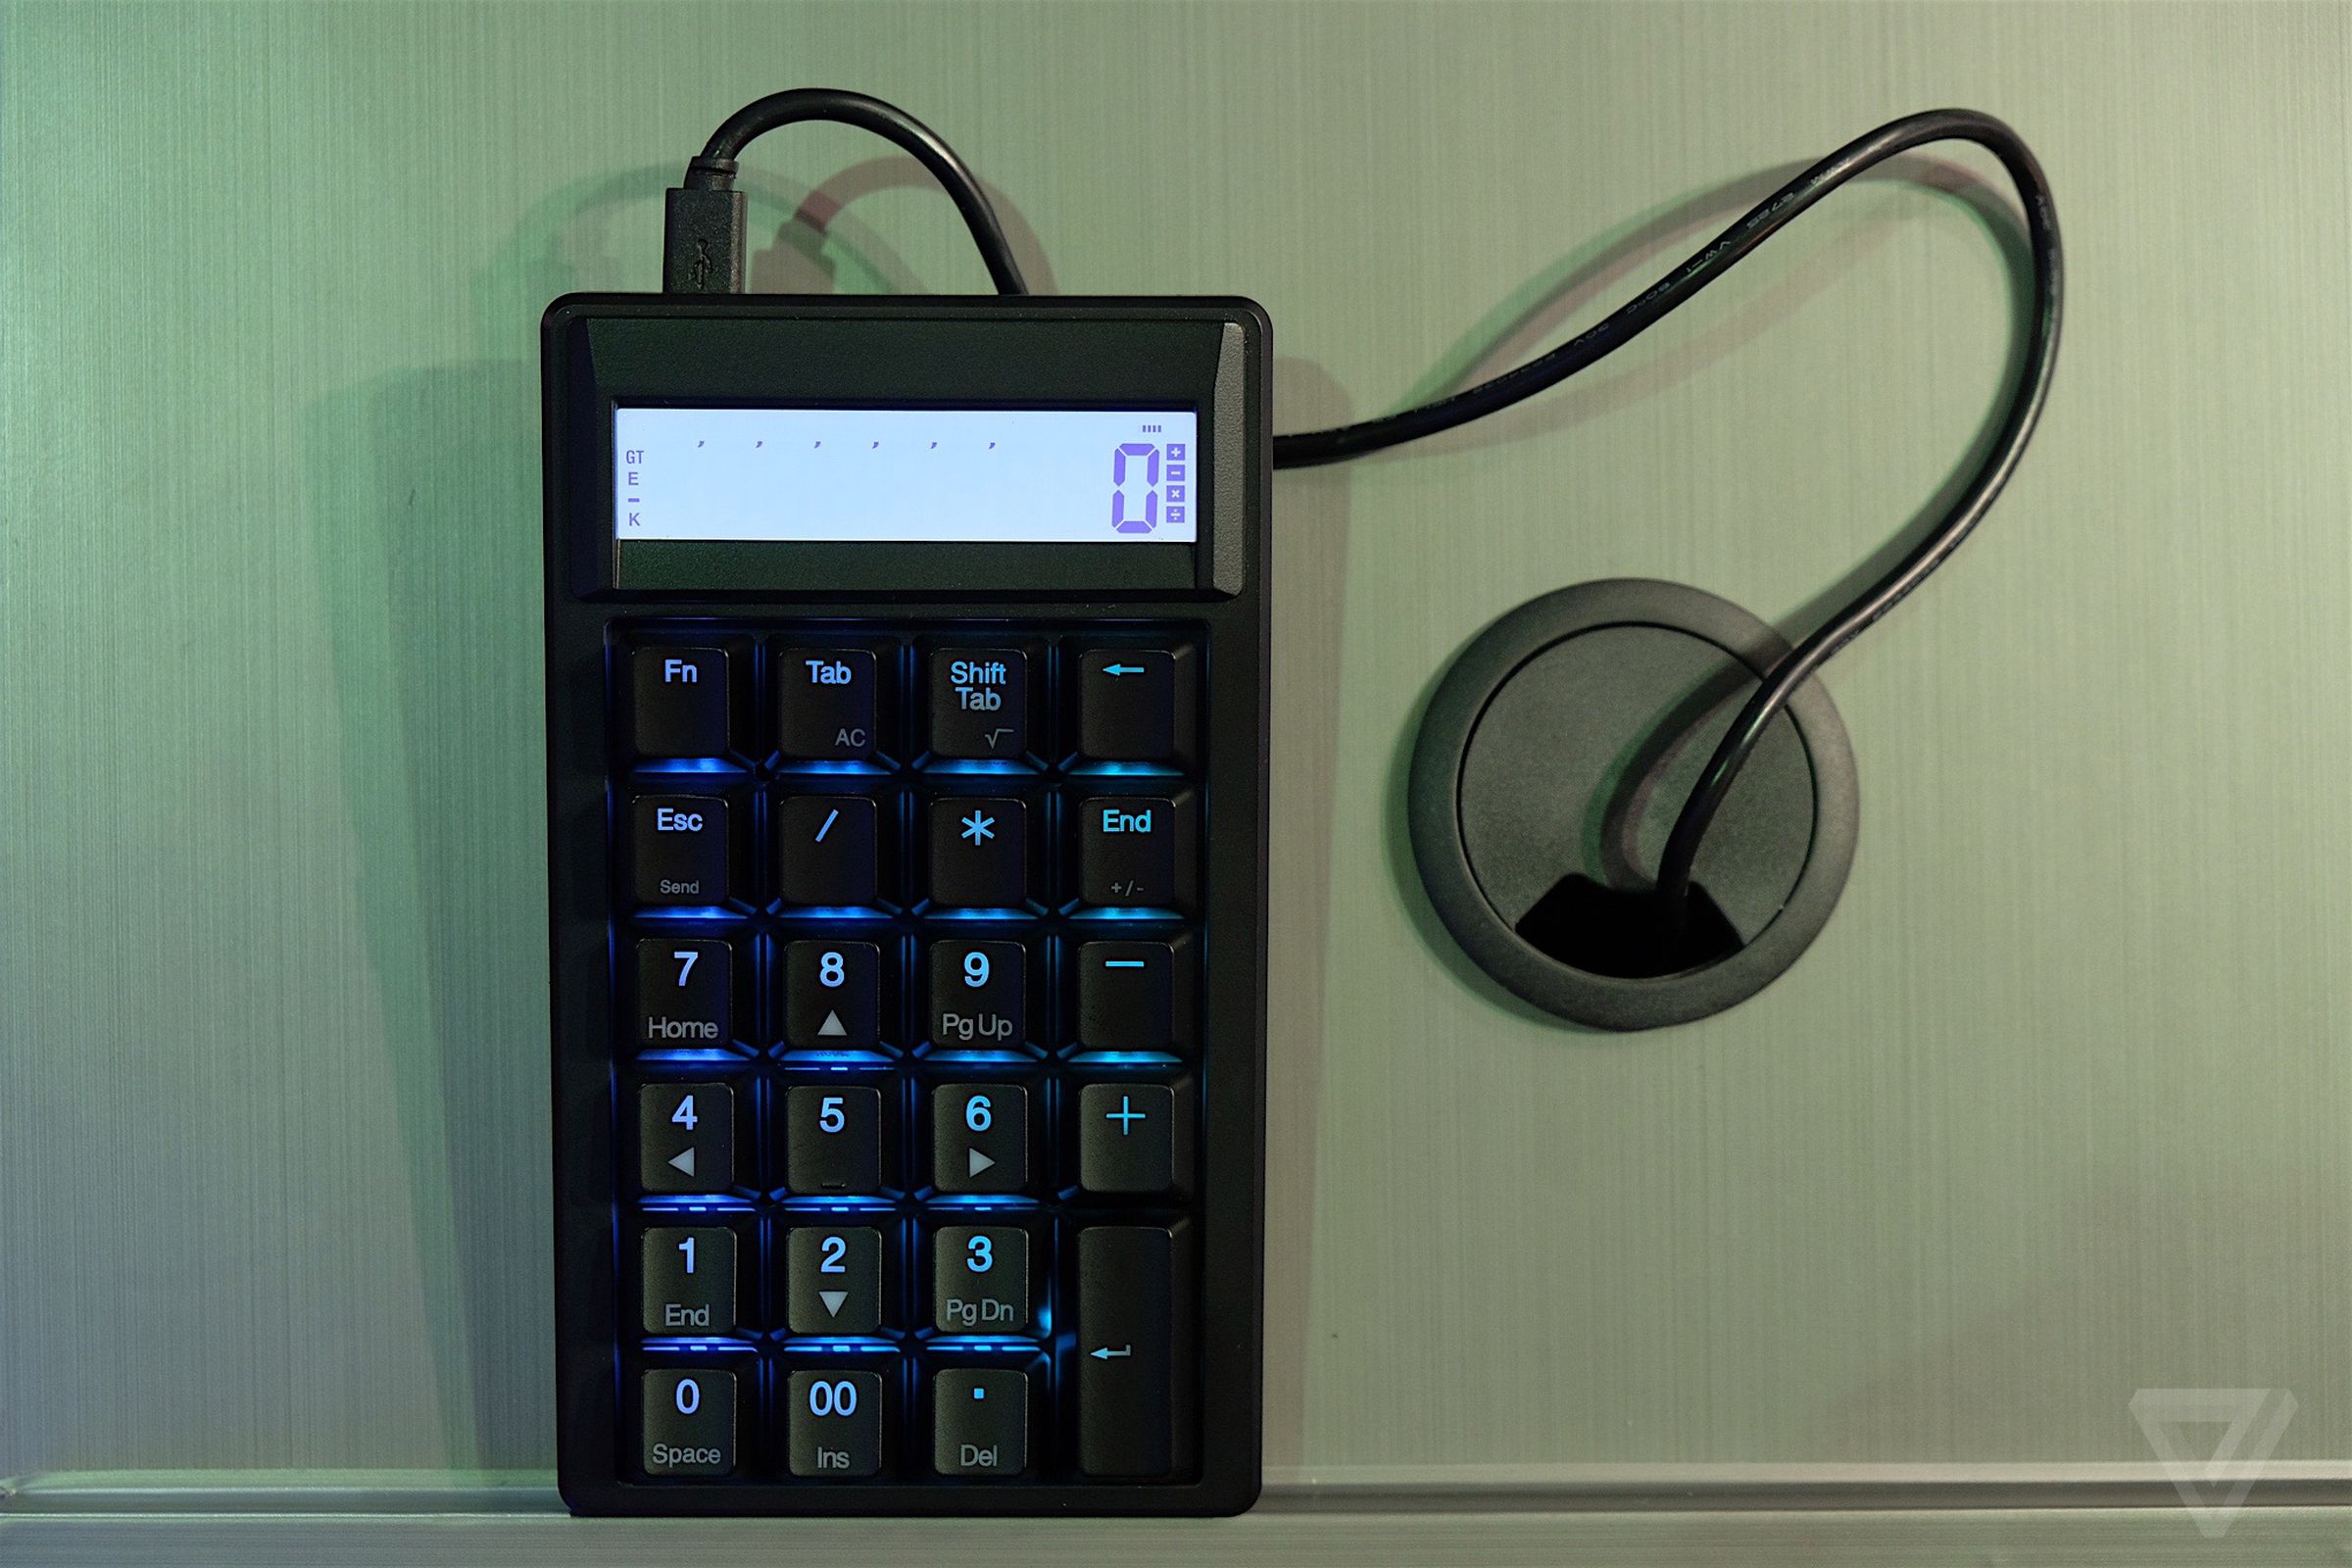 The Ducky Pocket Is A Mechanical Keyboard Calculator With Cherry Mx